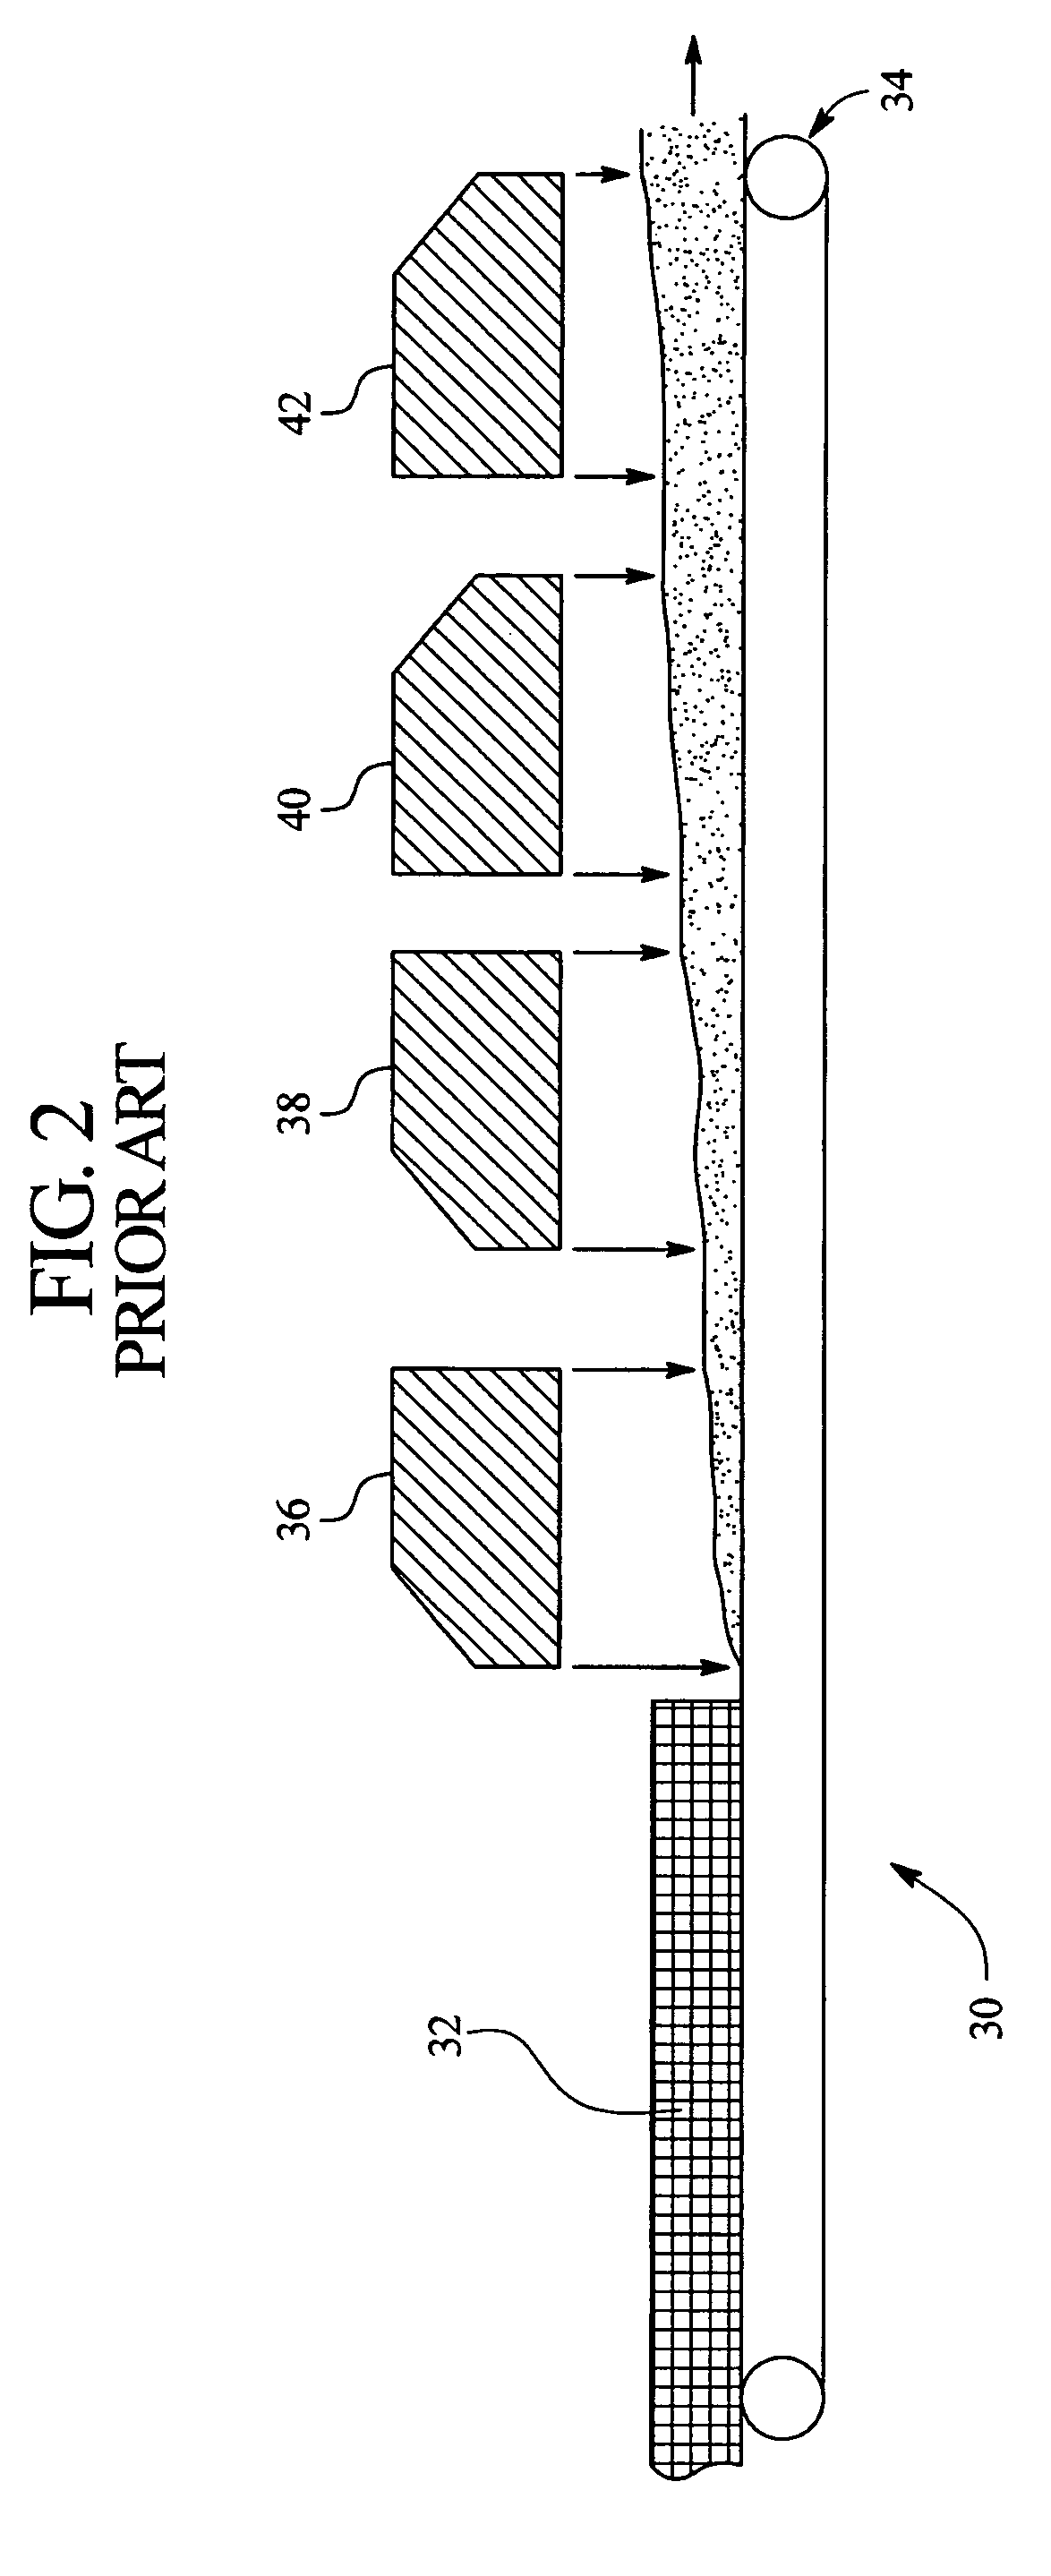 Oriented strand board panel having improved strand alignment and a method for making the same